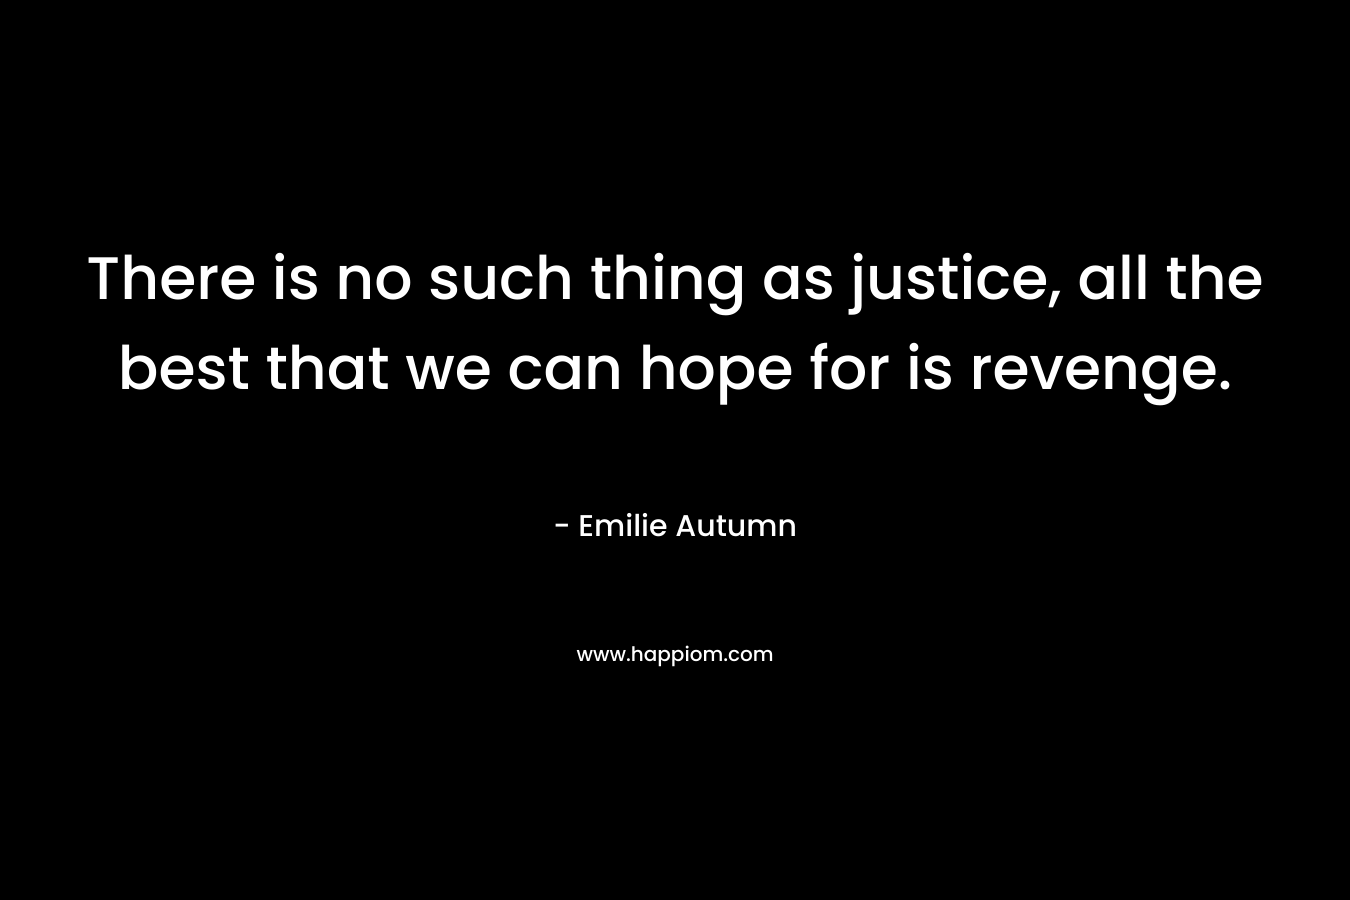 There is no such thing as justice, all the best that we can hope for is revenge. – Emilie Autumn